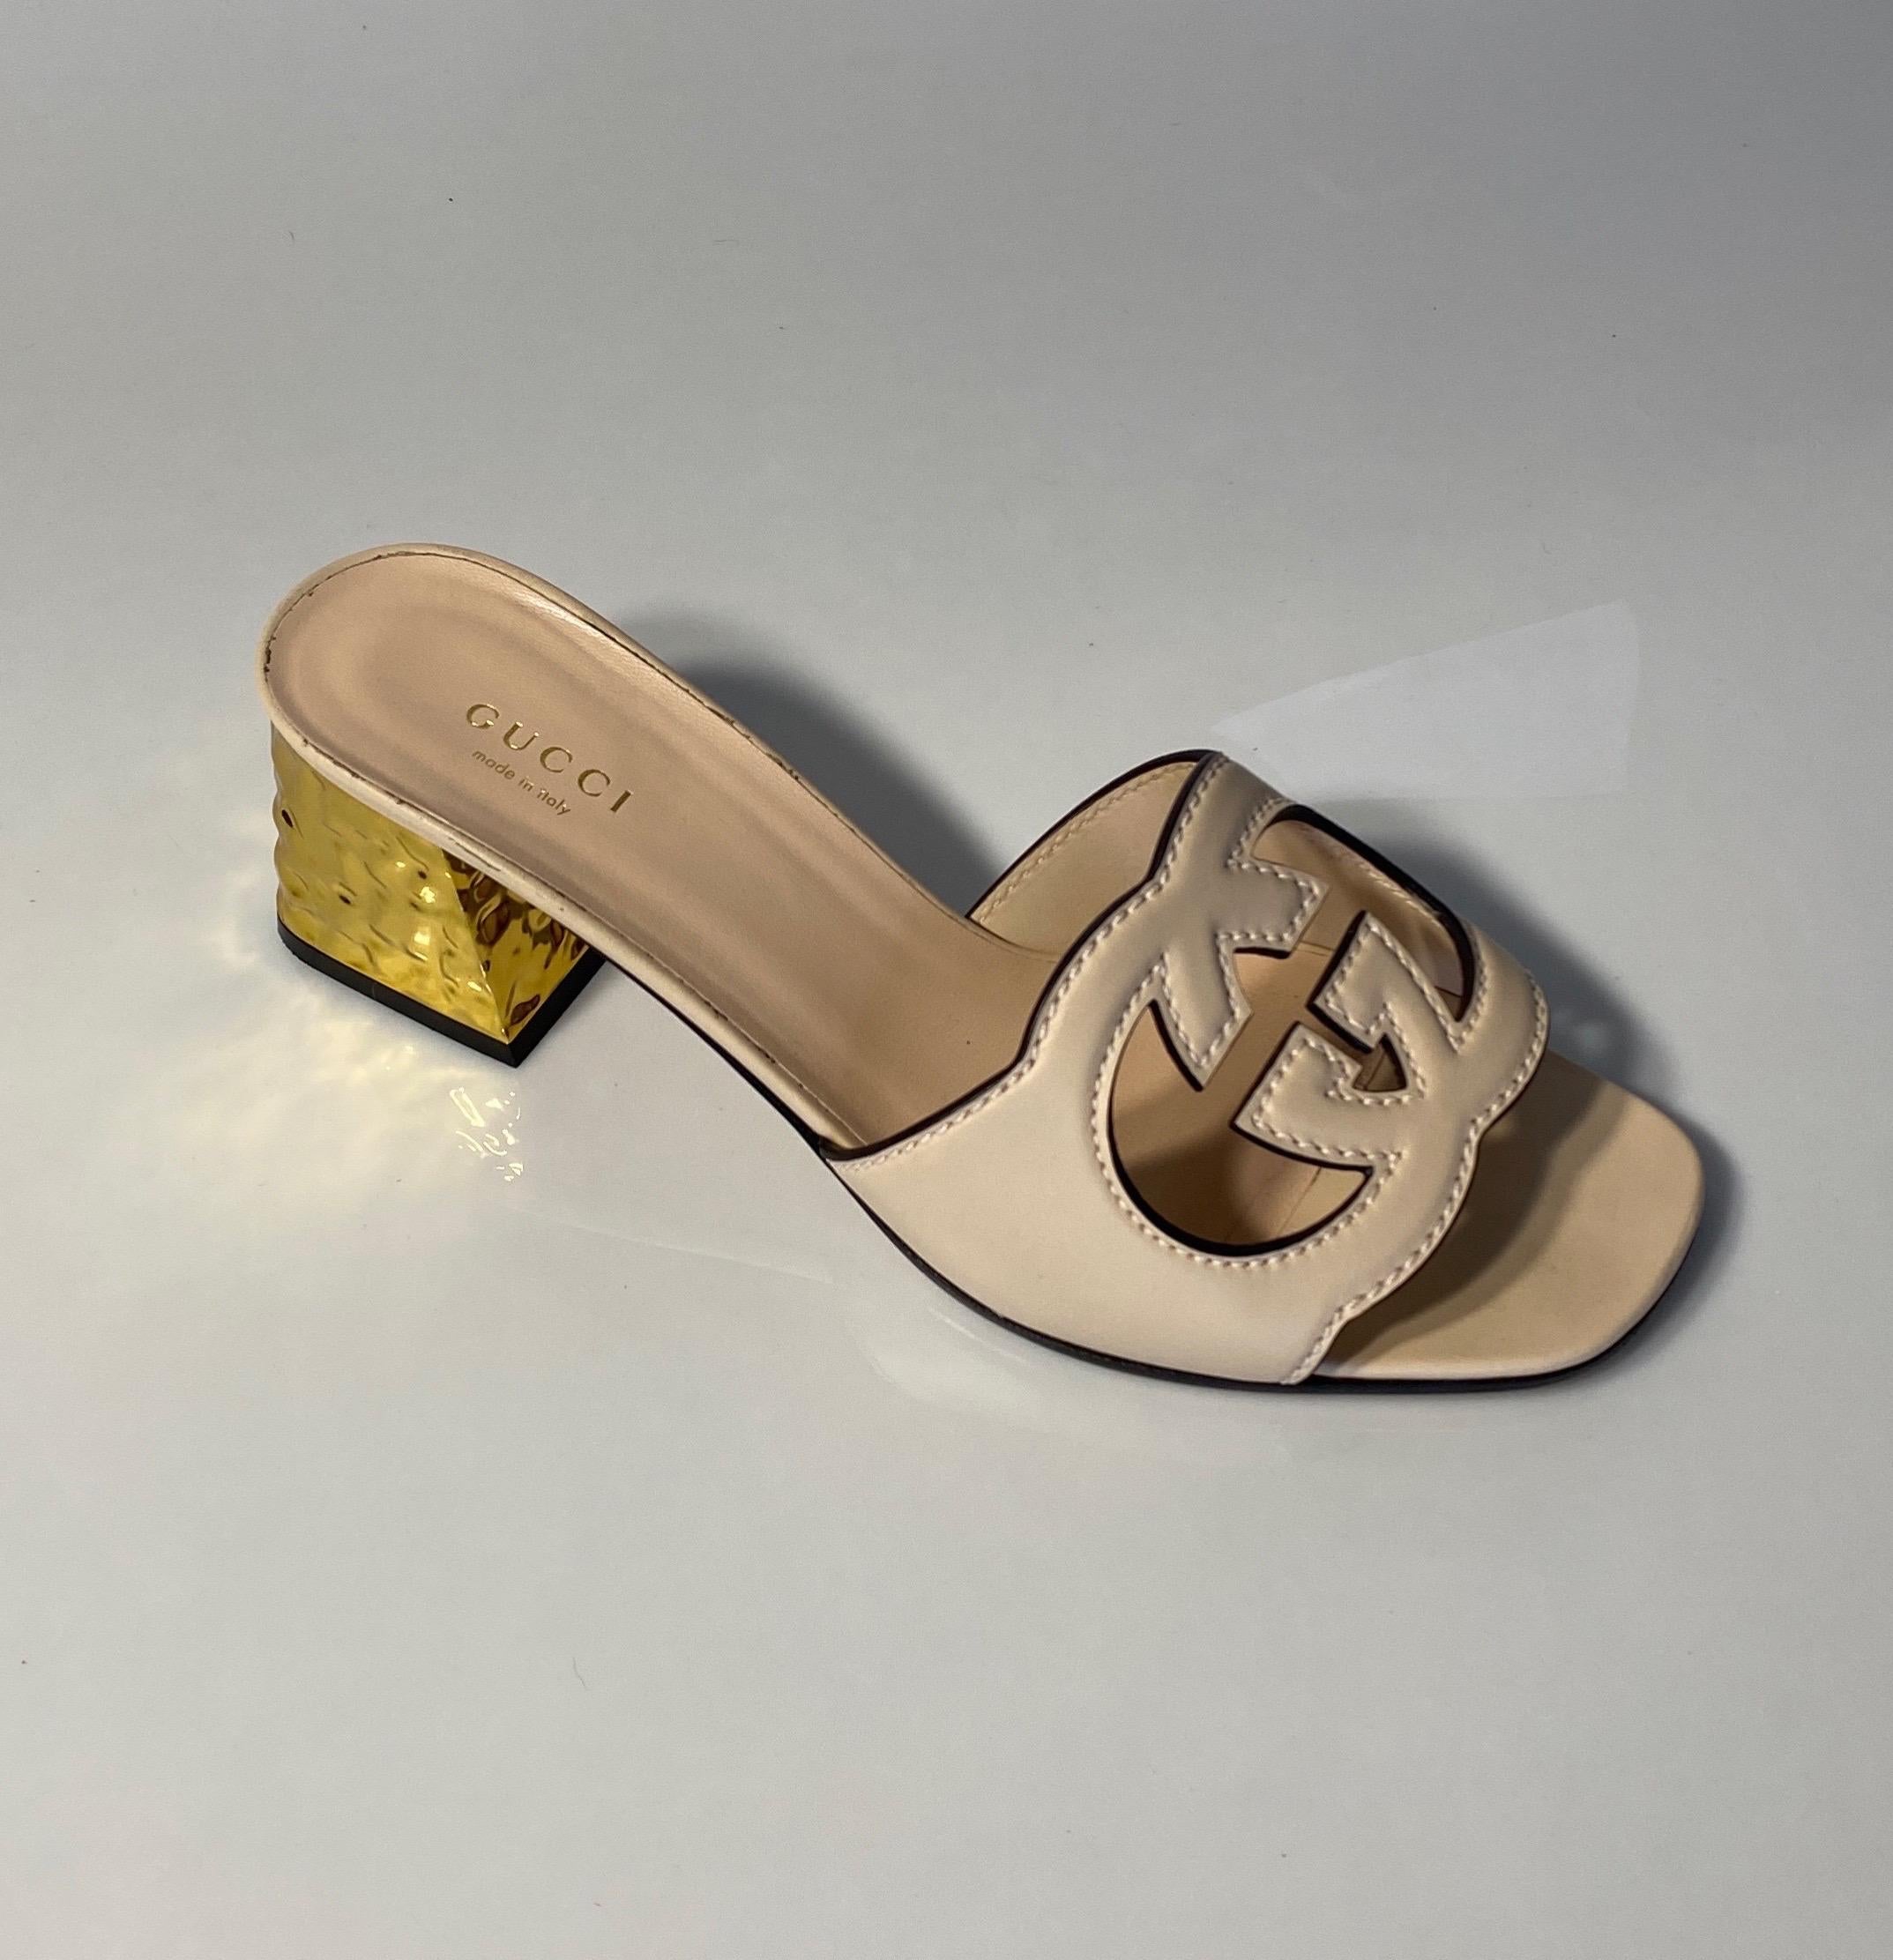 Gucci Rose/Nude Leather Interlocking G Cut-out Sandal - Size 37.5 This must have sandal has a gold hammered effect chunky mid size heel which gives it the glam effect. Influenced by an archival design from the '70s-a hallmark era of the House, the